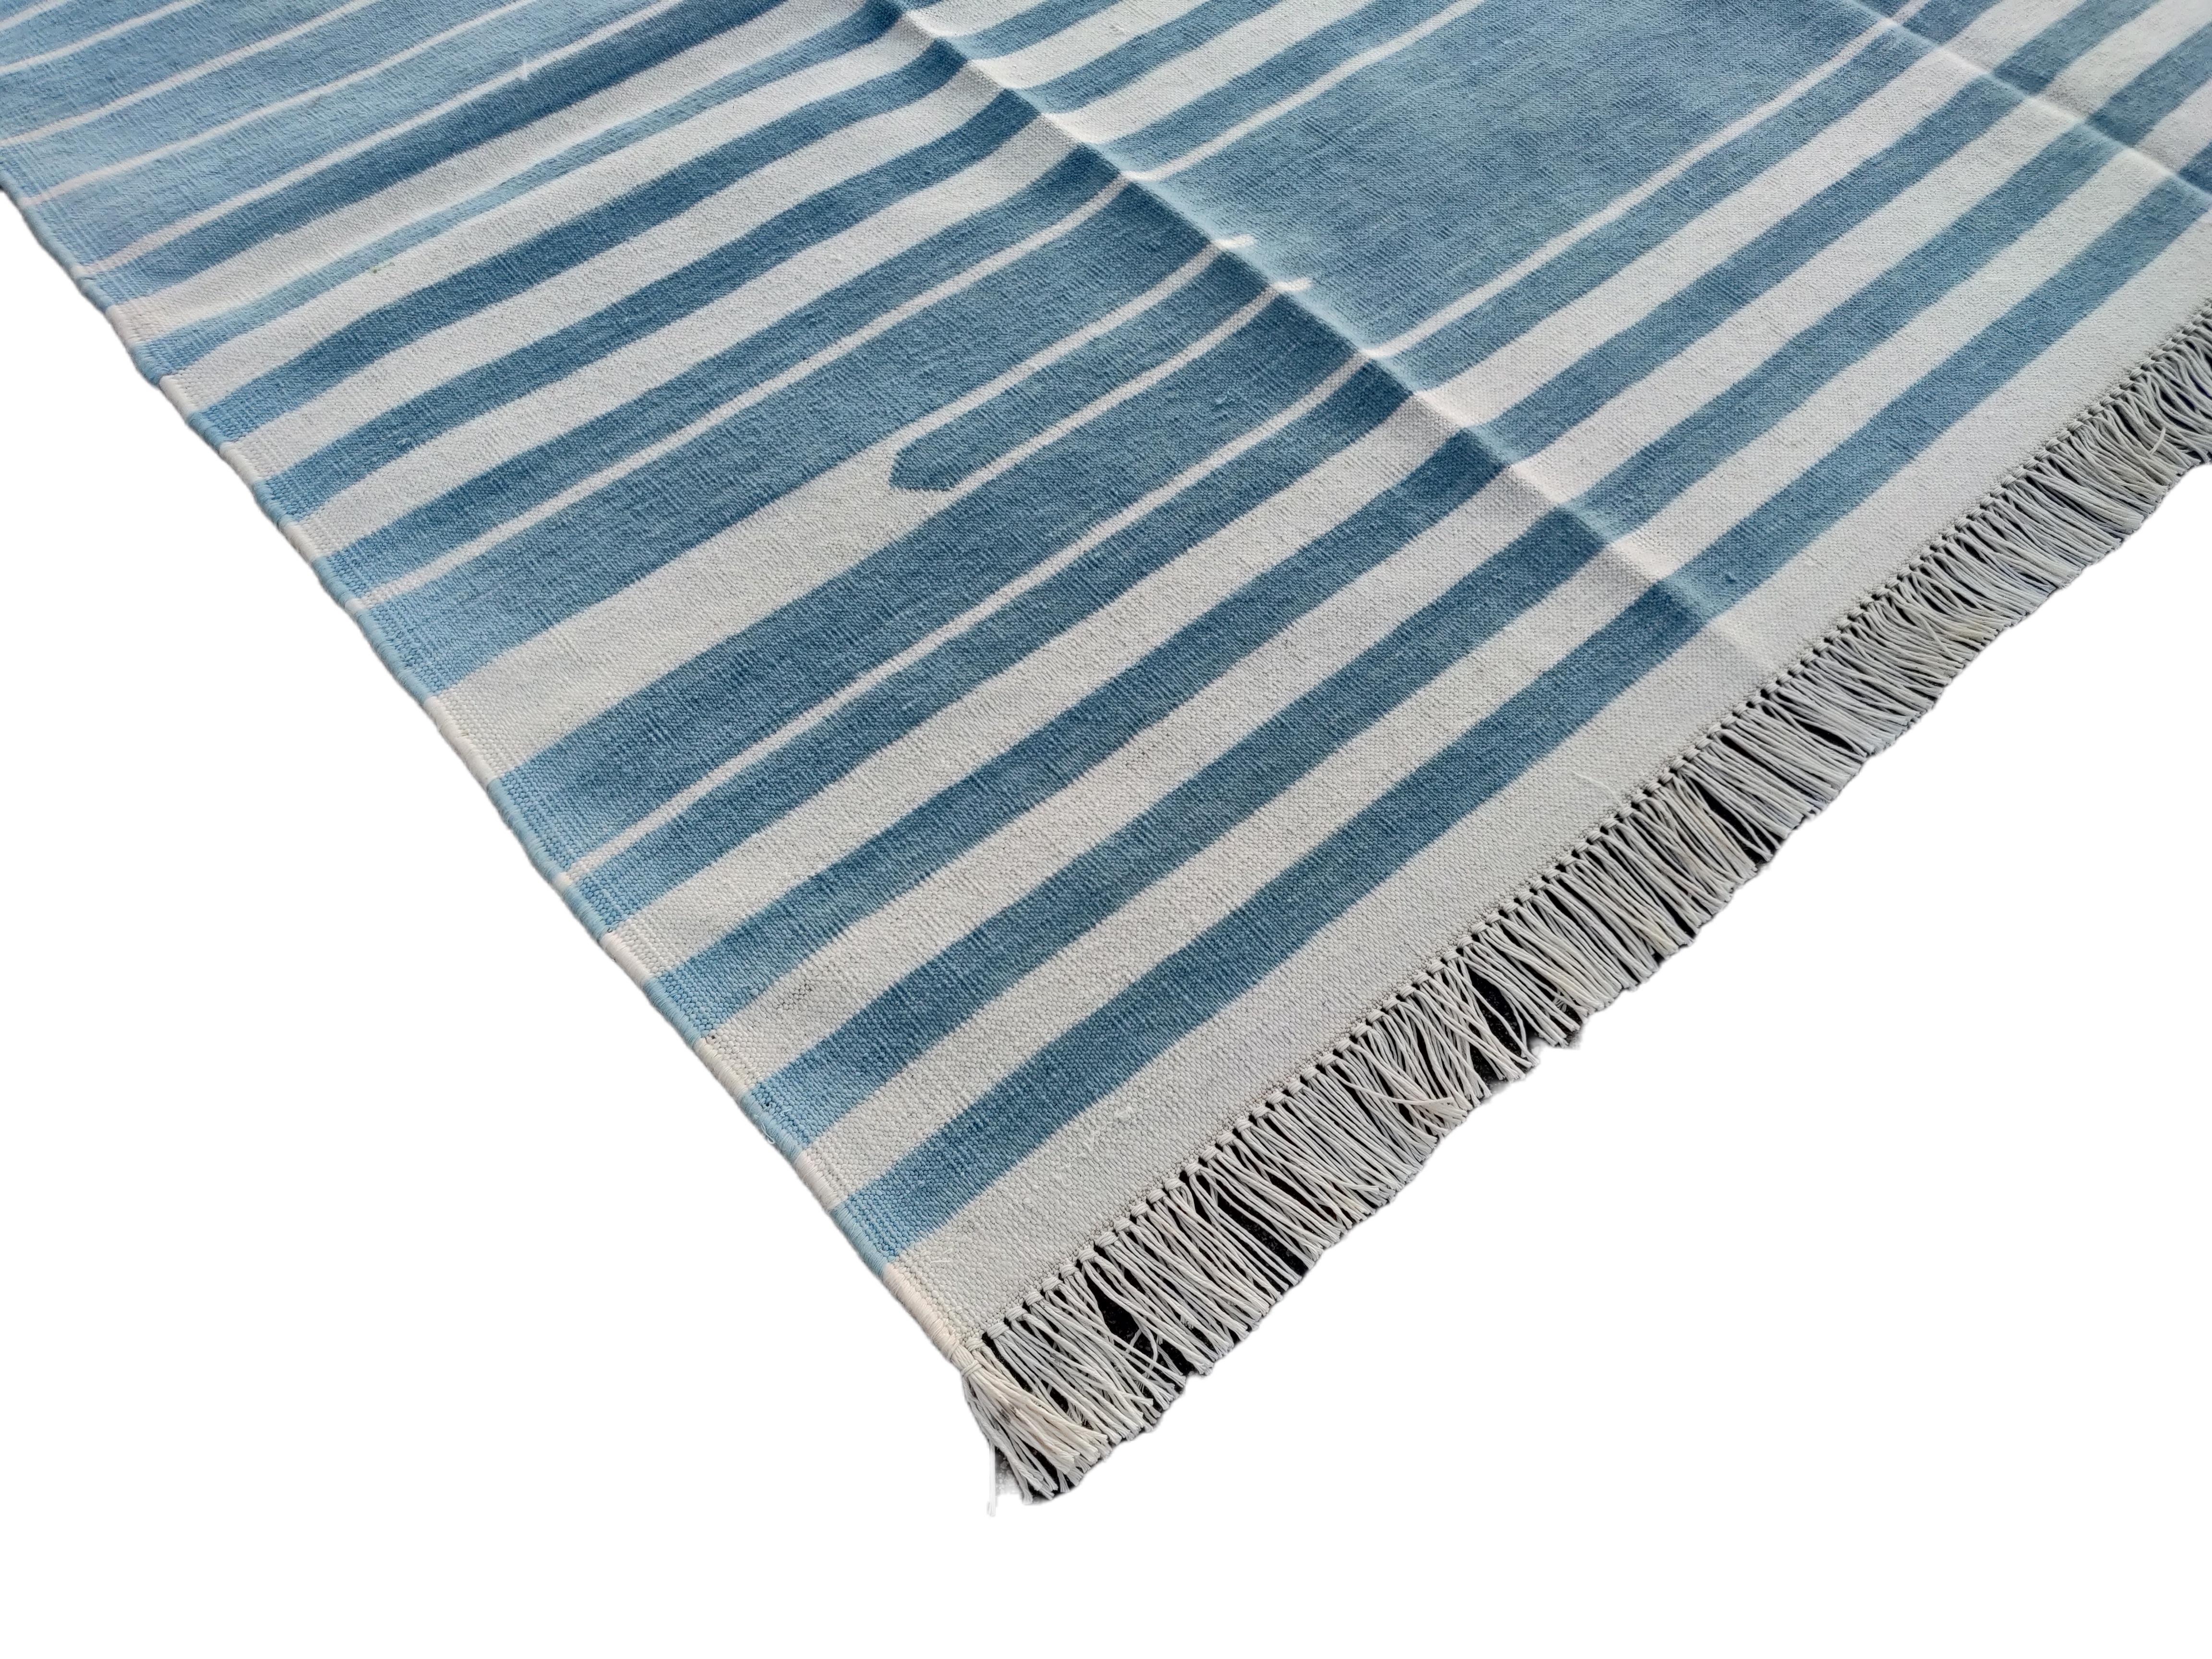 Hand-Woven Handmade Cotton Area Flat Weave Rug, 5x8 Blue And White Striped Indian Dhurrie For Sale